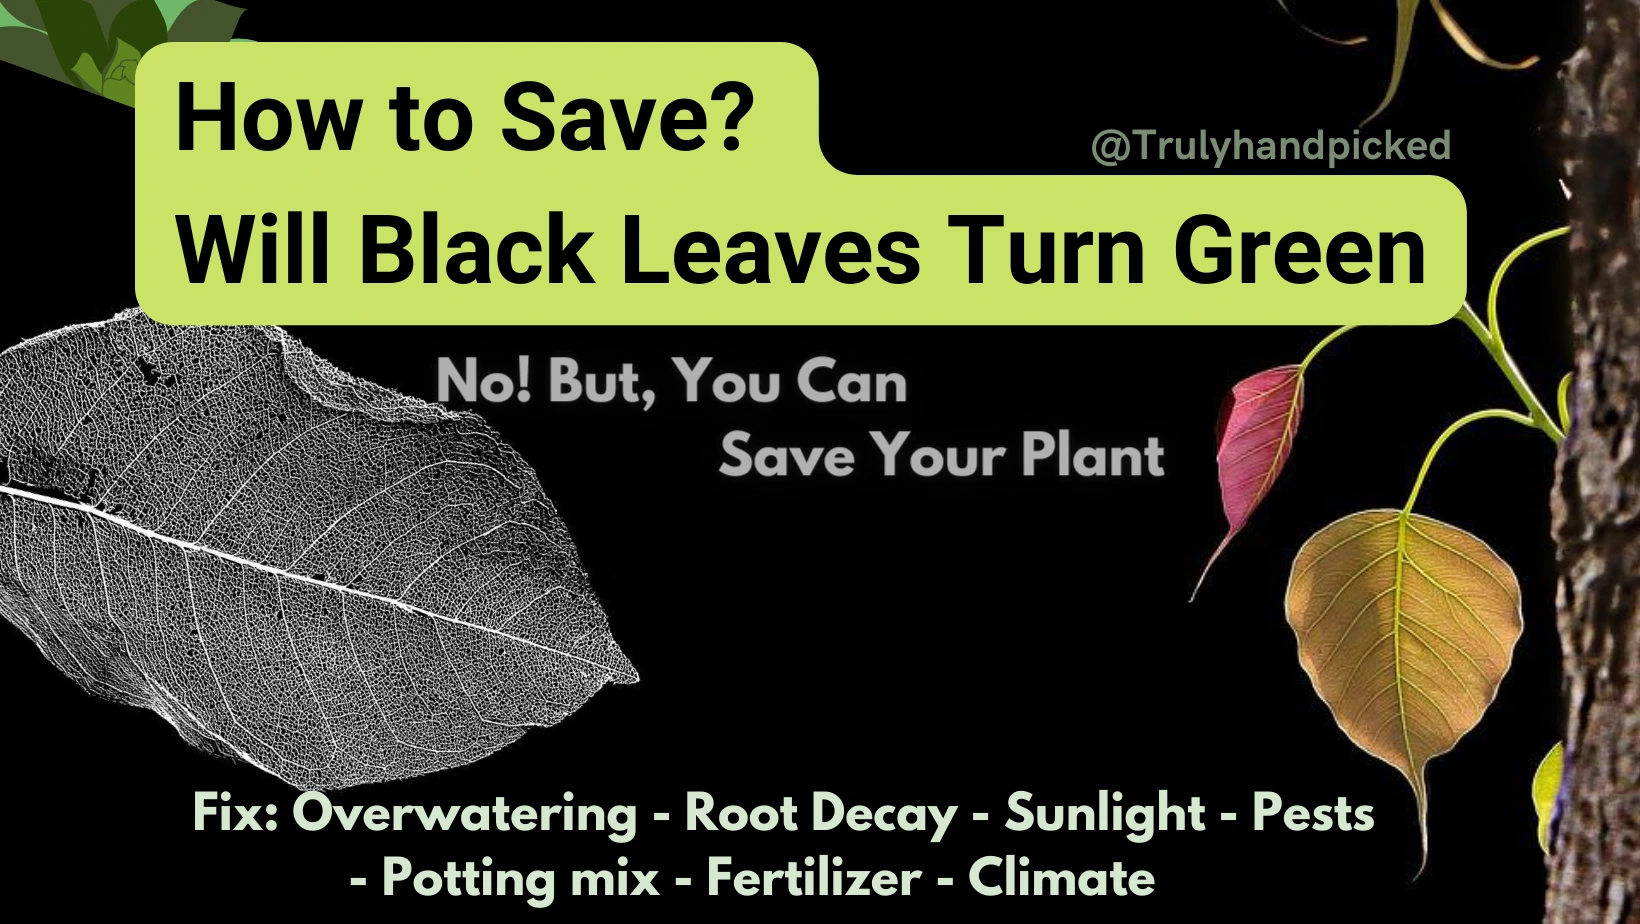 How to save your dying plant with black leaves